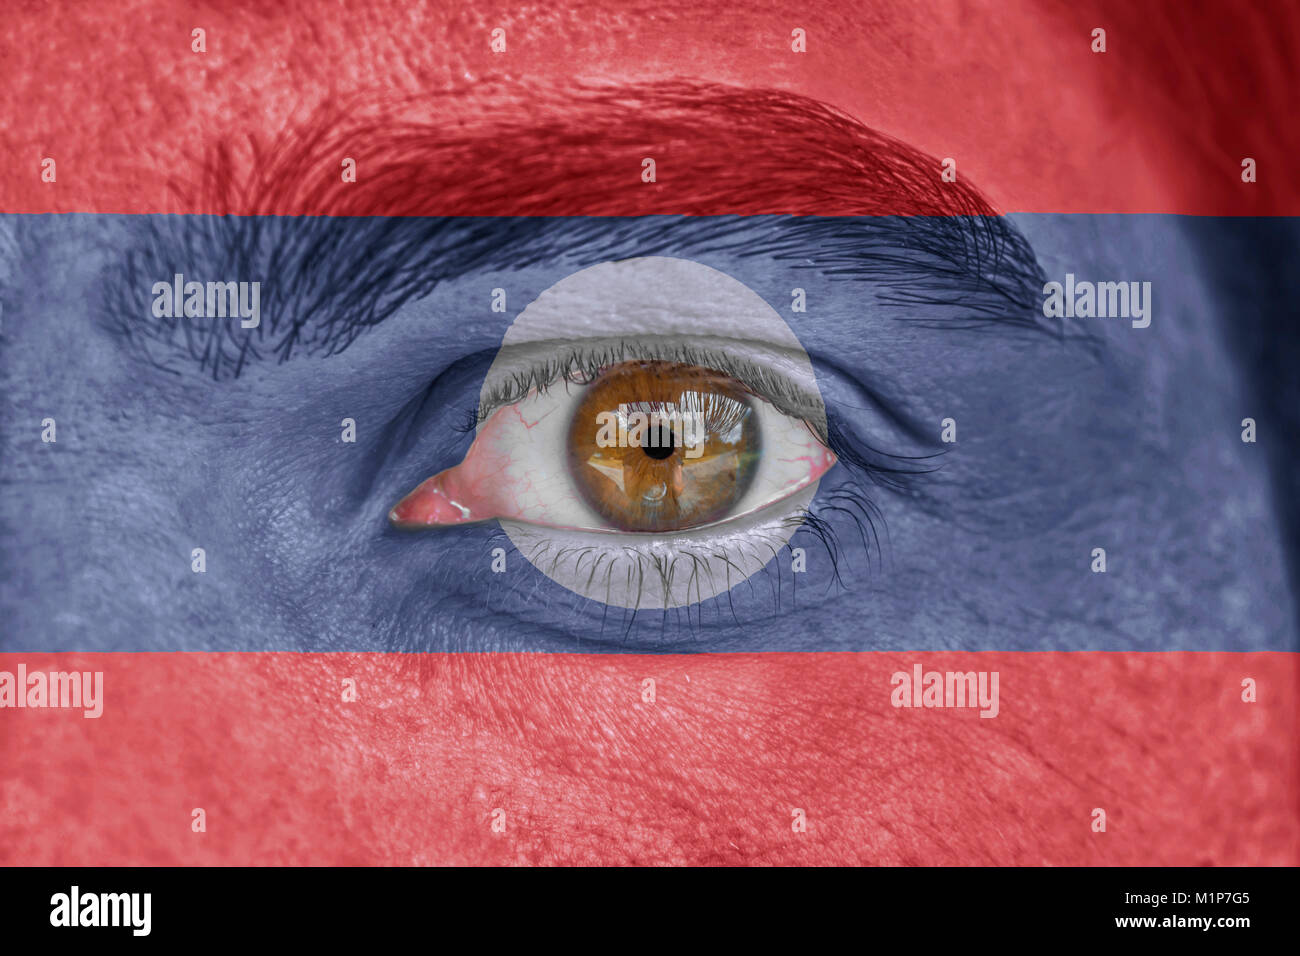 Human face and eye painted with flag of Laos Stock Photo